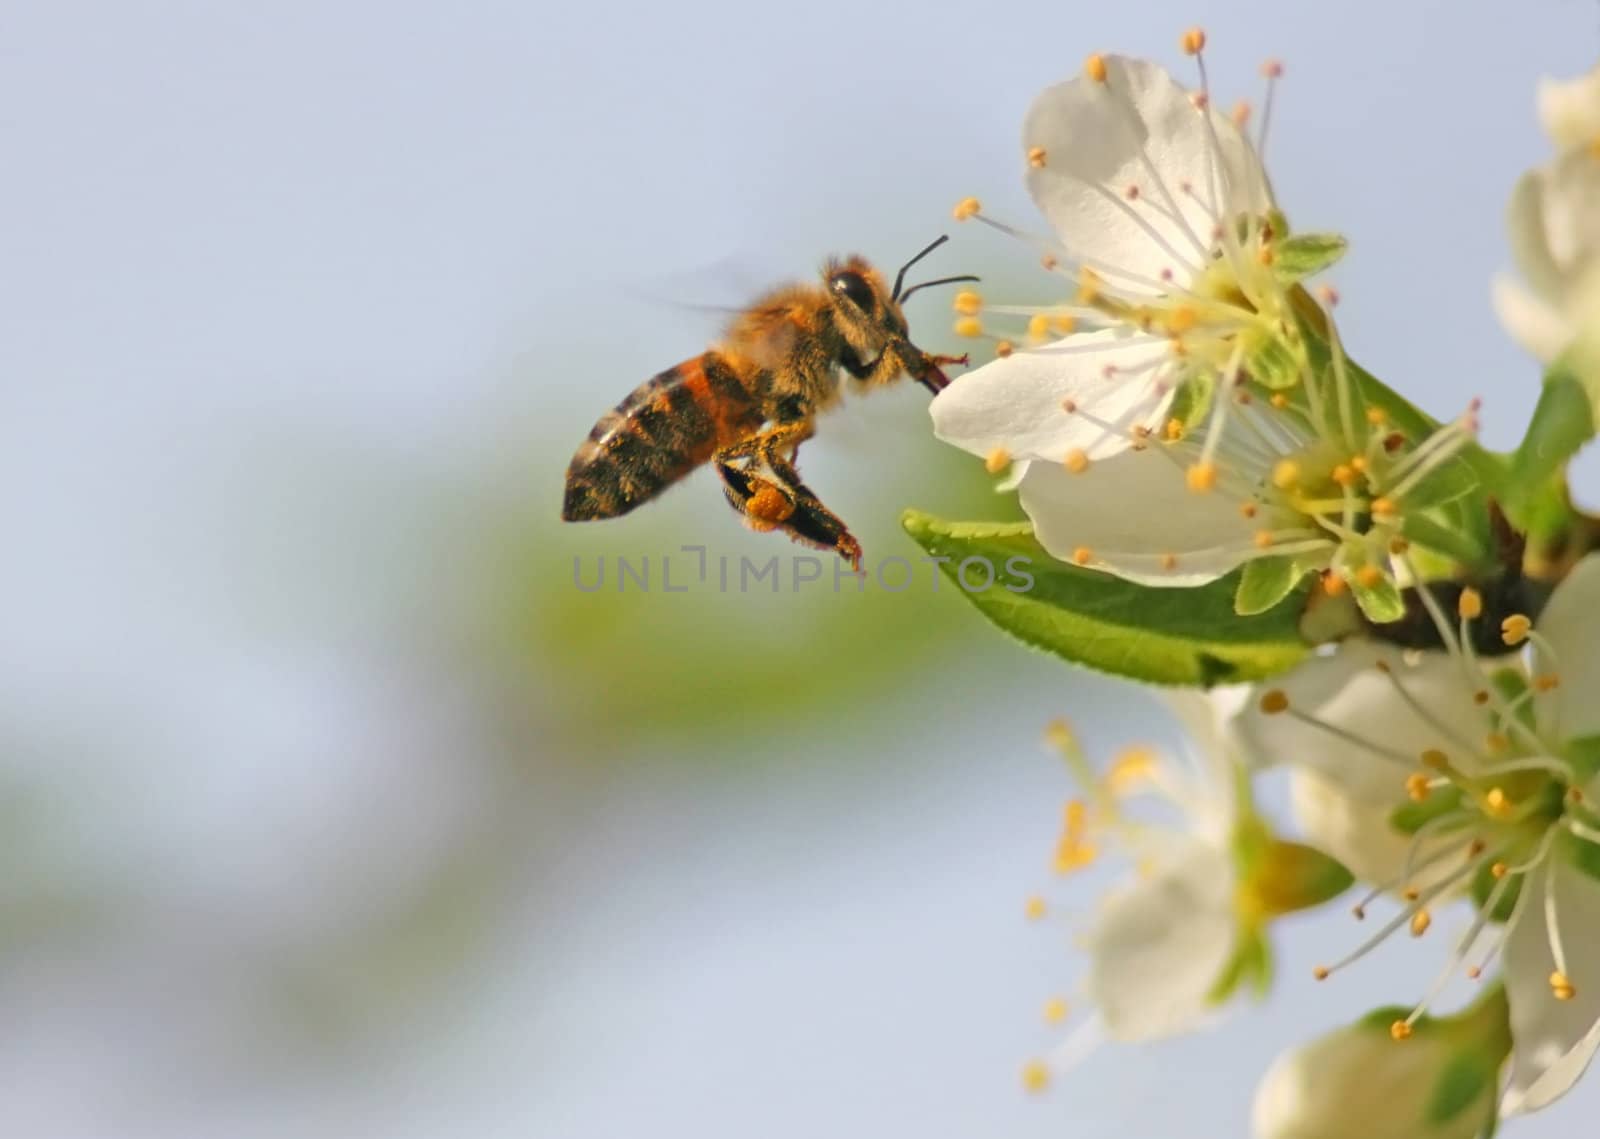 This image shows a bee in flight